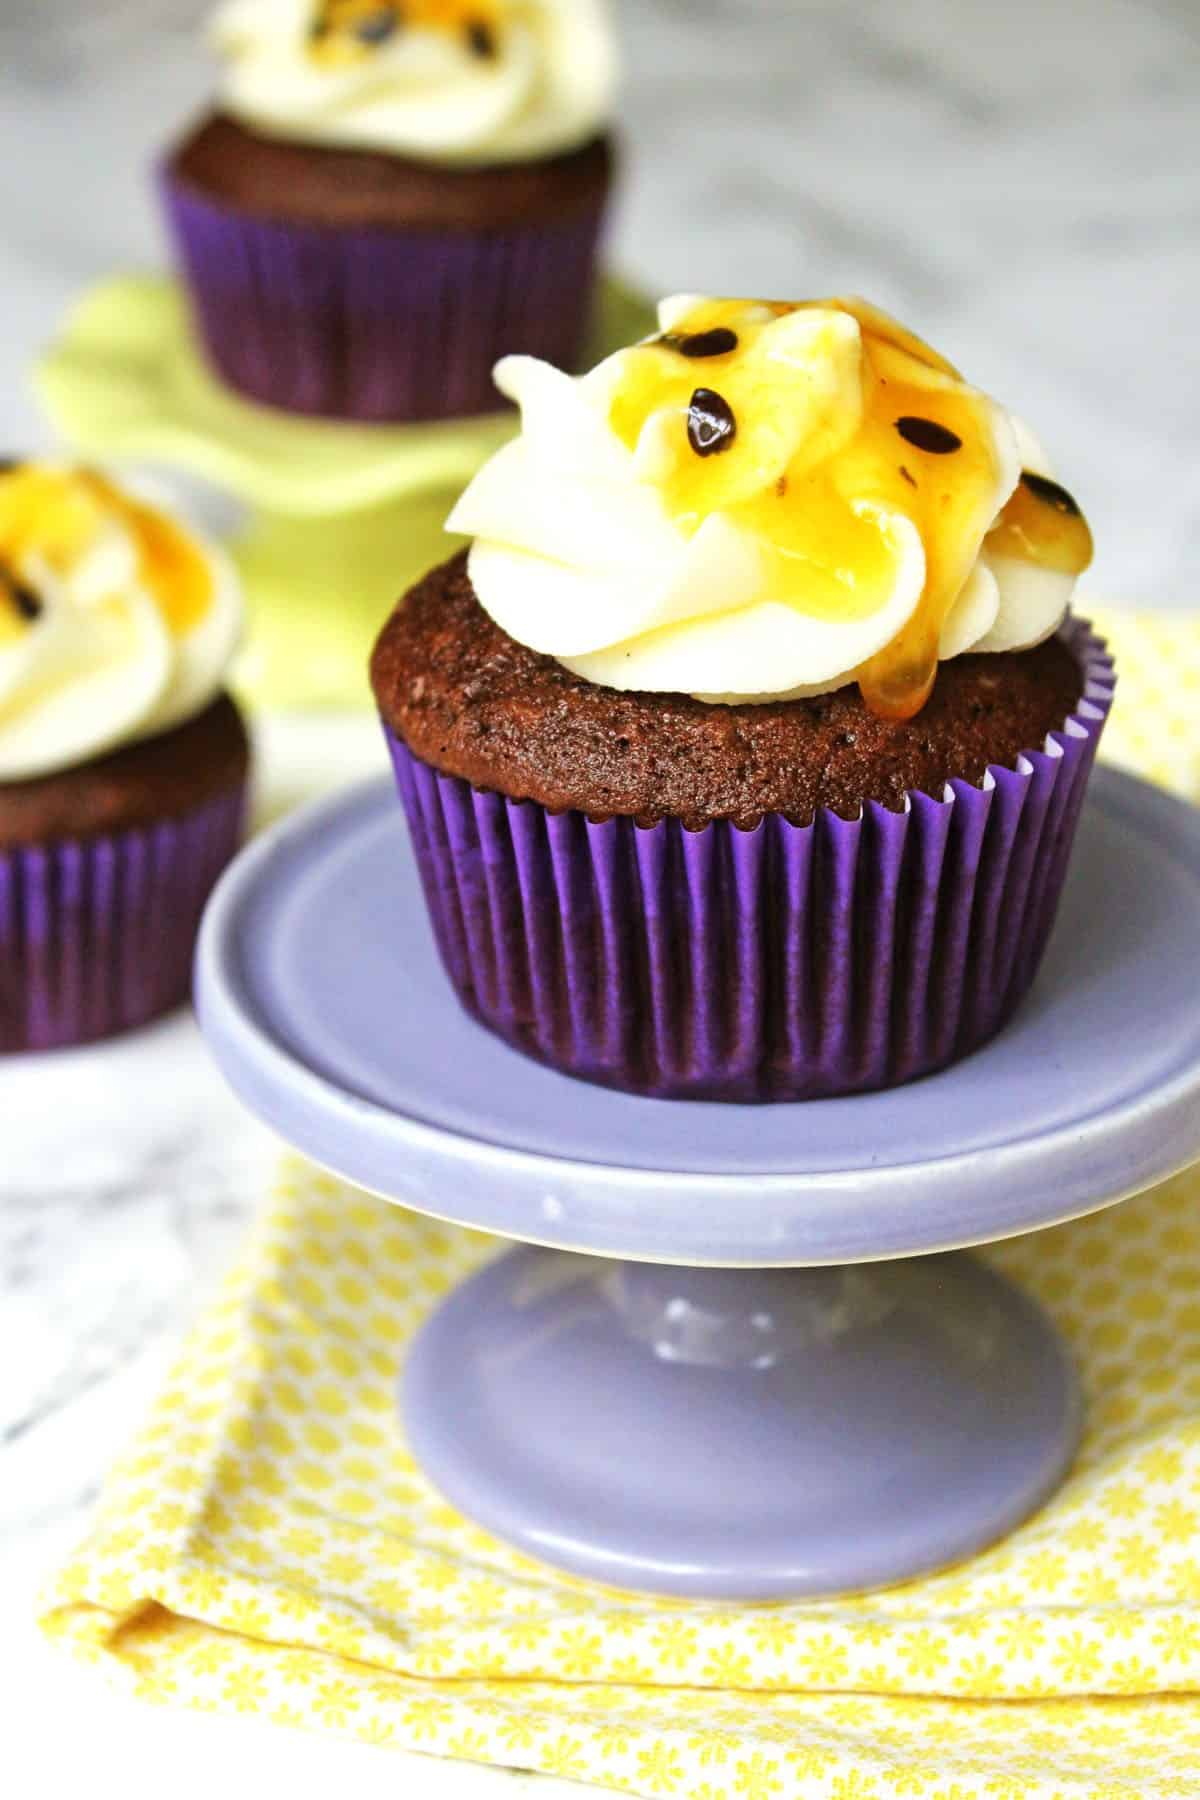 Chocolate and passion fruit cupcakes